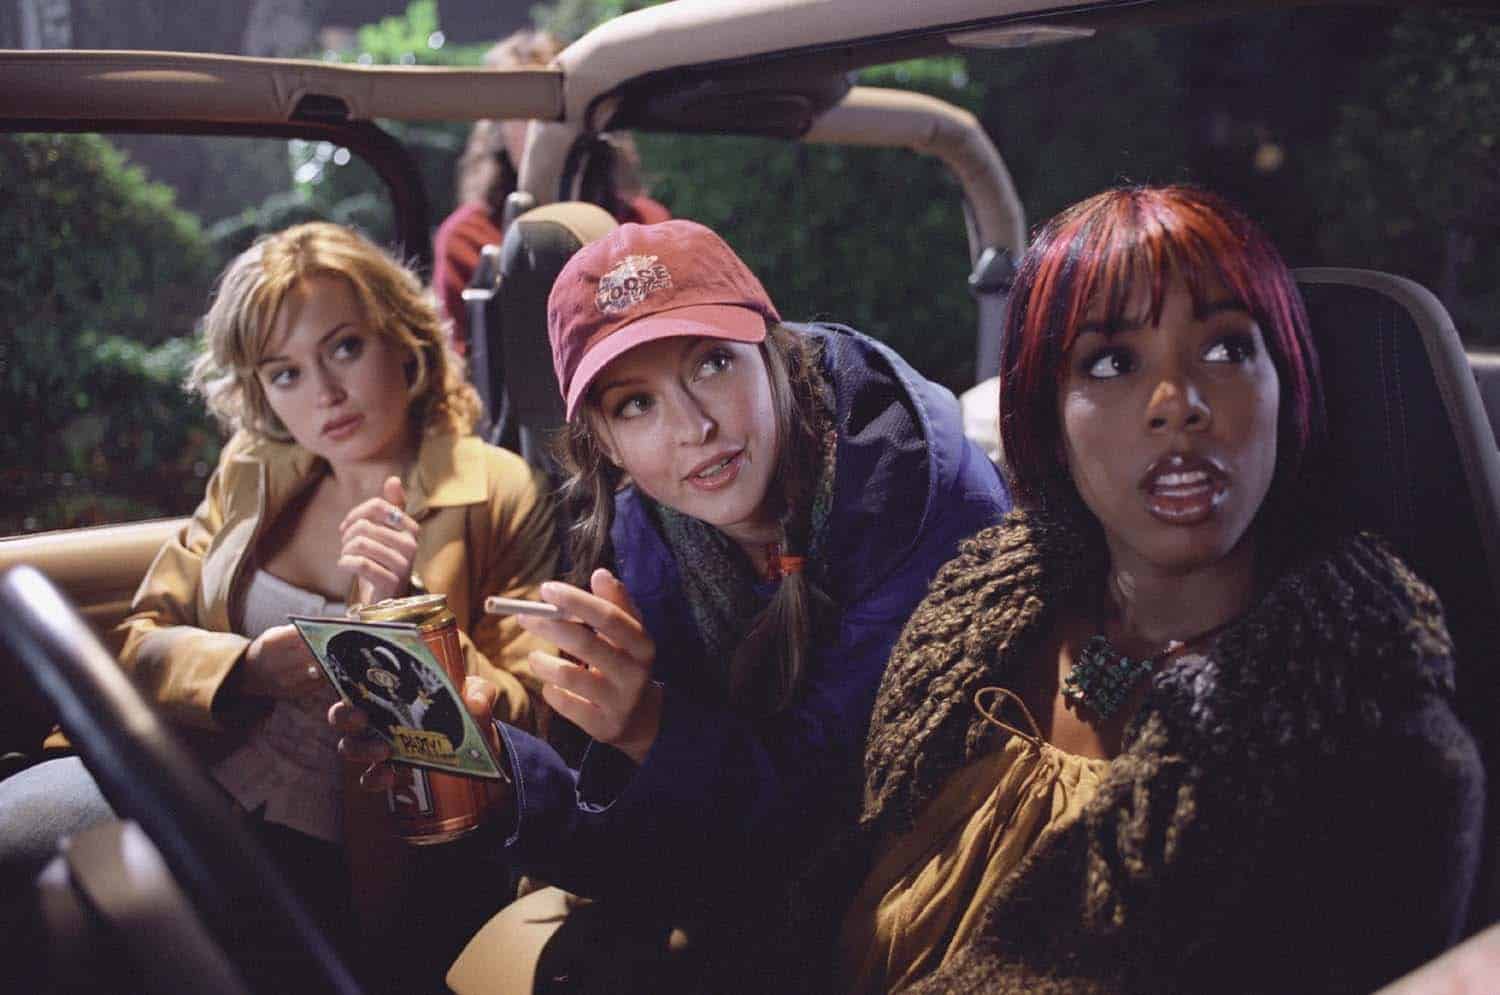 Three girls looking snarky in a Jeep in this photo from New Line Cinema